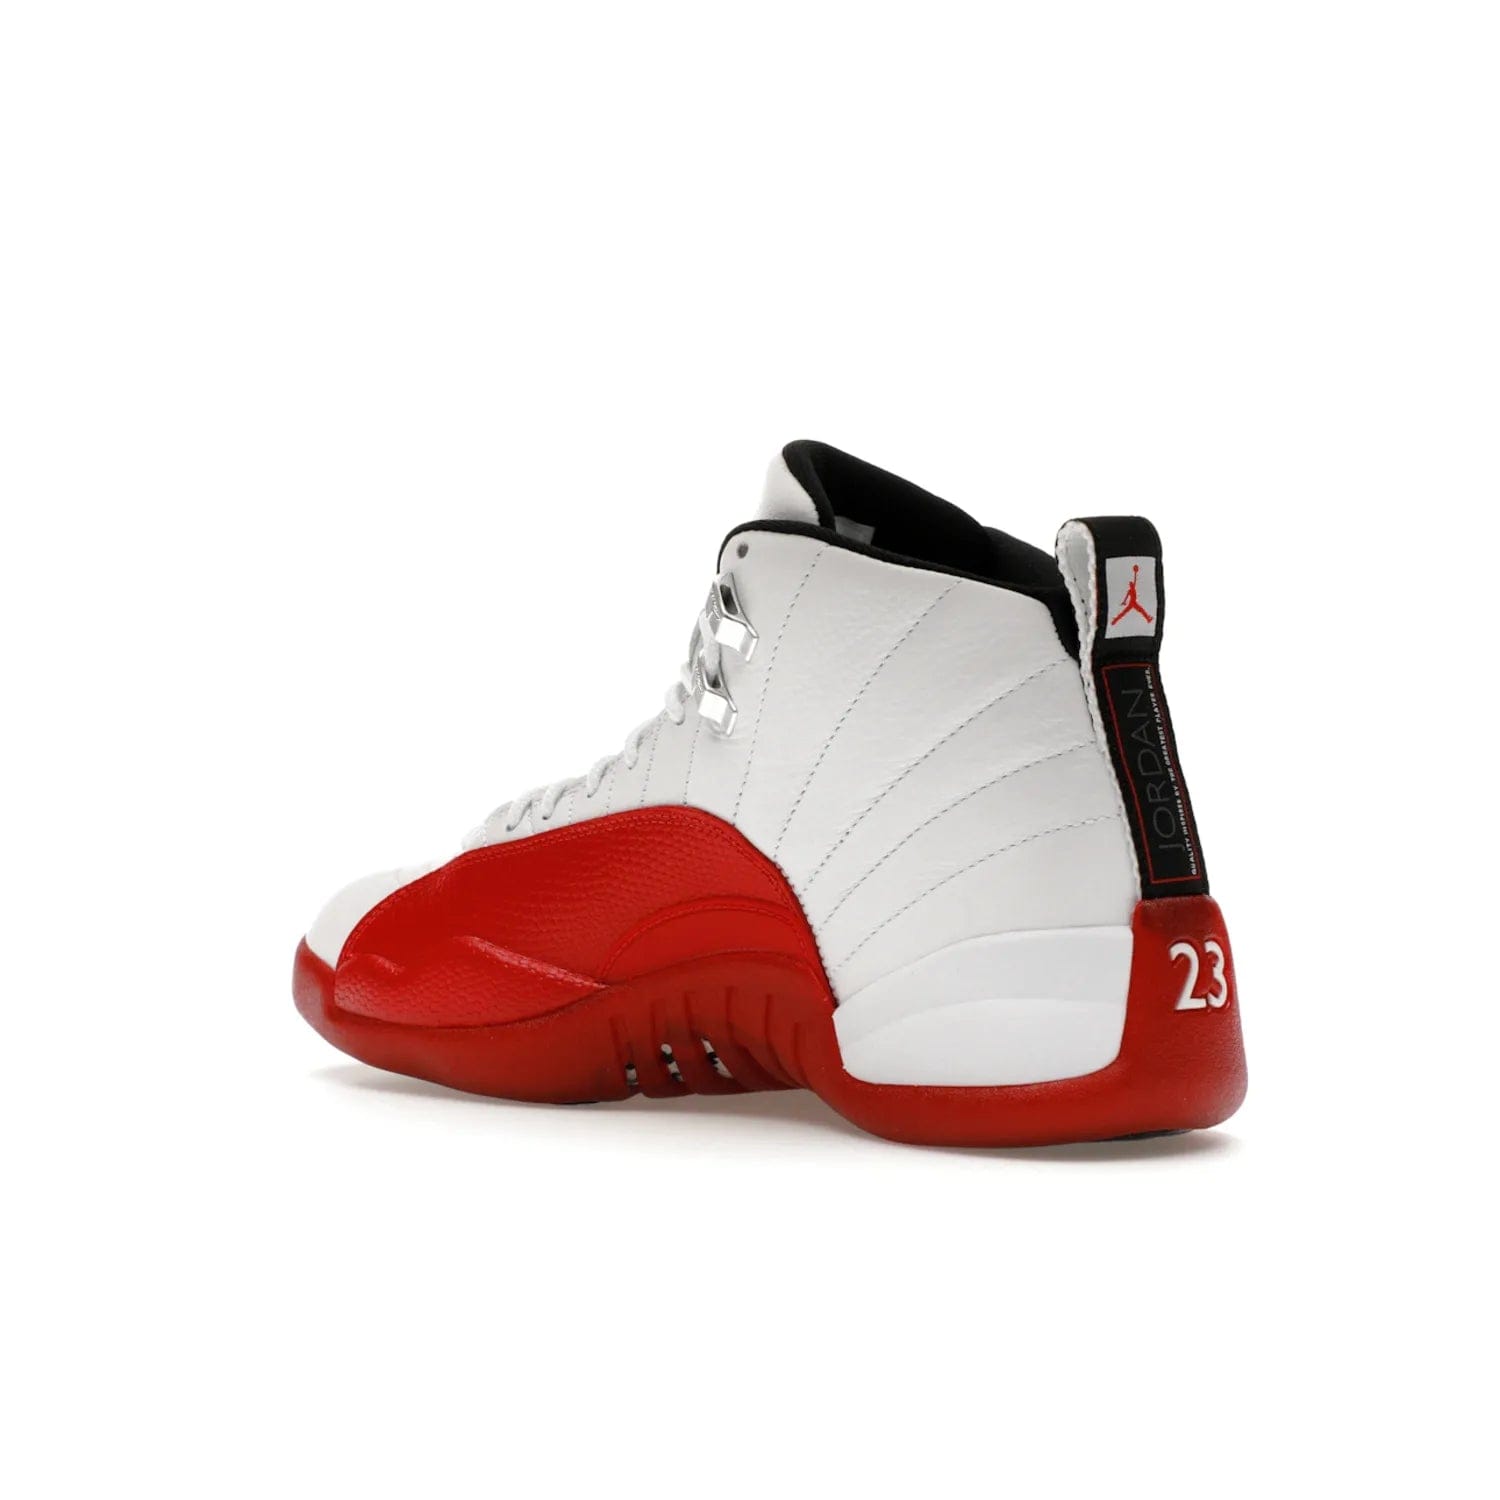 Jordan 12 Retro Cherry (2023) - Image 23 - Only at www.BallersClubKickz.com - Live your sneaker legend with the Jordan 12 Retro Cherry. Iconic pebbled leather mudguards, quilted uppers, and varsity red accents make this 1997 classic a must-have for 2023. Shine on with silver hardware and matching midsoles, and bring it all together for limited-edition style on October 28th. Step into Jordan legacy with the Retro Cherry.